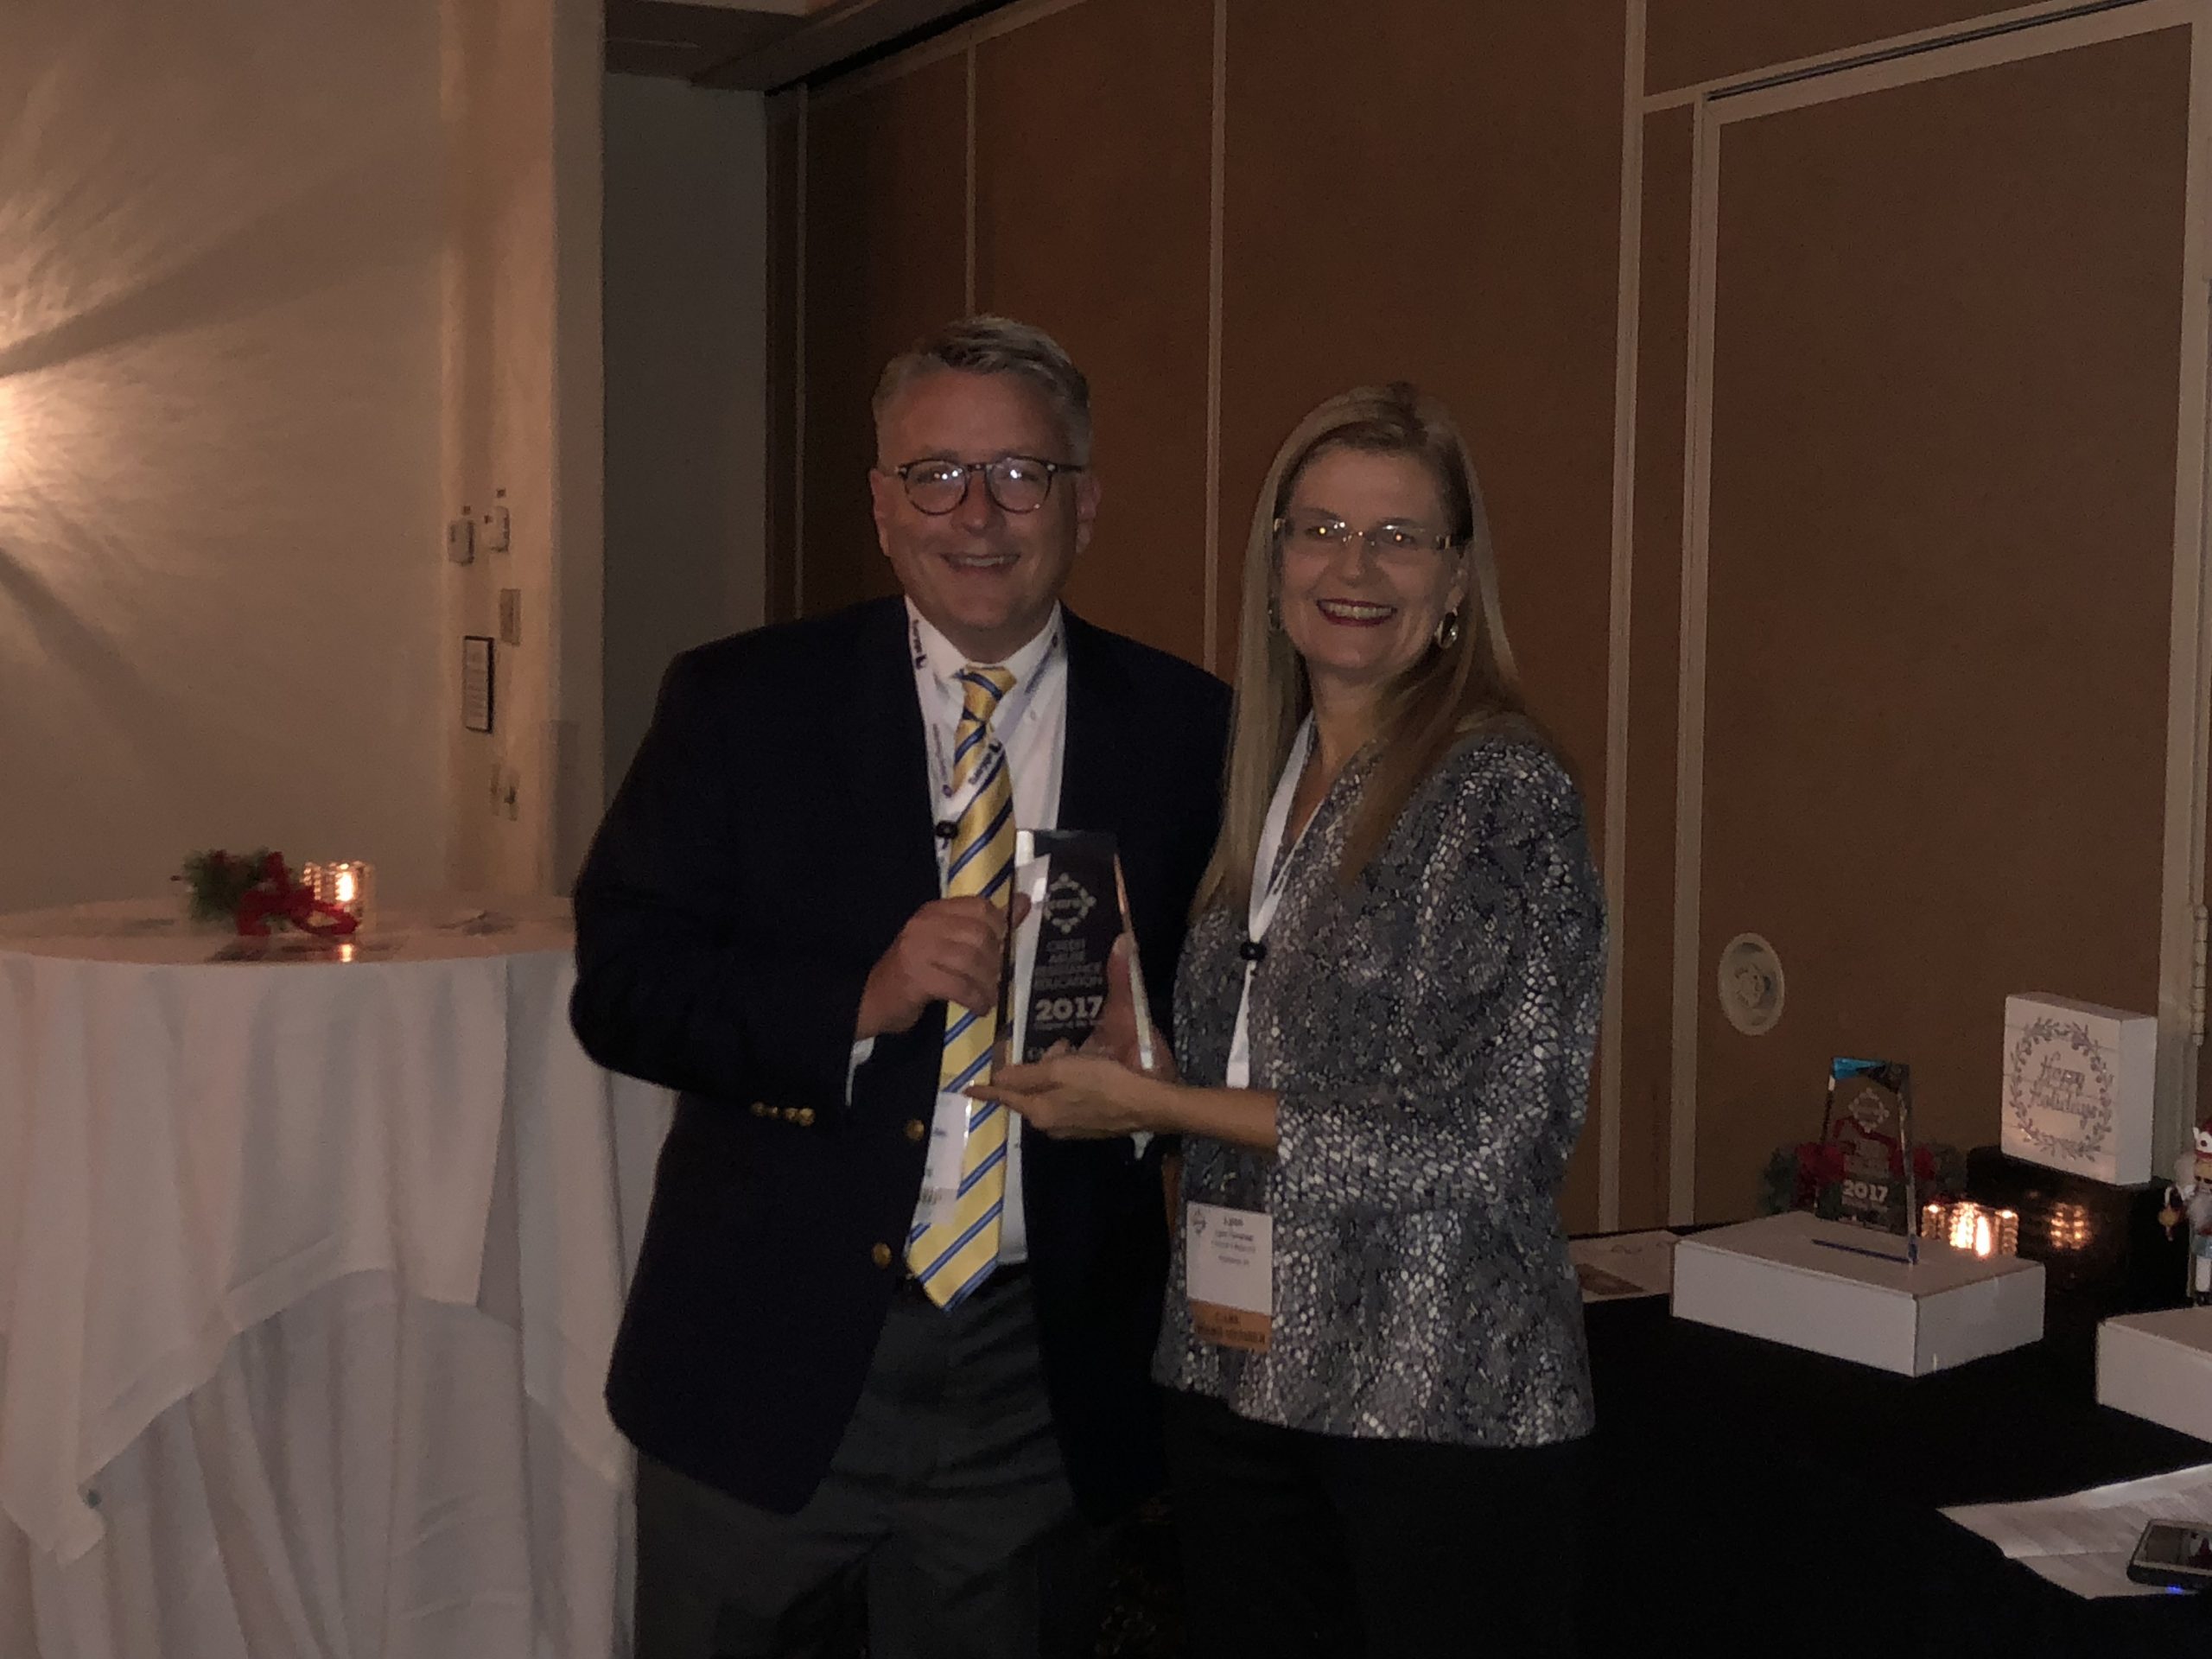 Jeff Cavender (Troutman Sanders) accepts the 2018 Chapter of the Year Award for the CARE Altanta Chapter. The award was presented by the CARE Board Chairwoman Lynn Tavenner (Tavenenr & Beran).